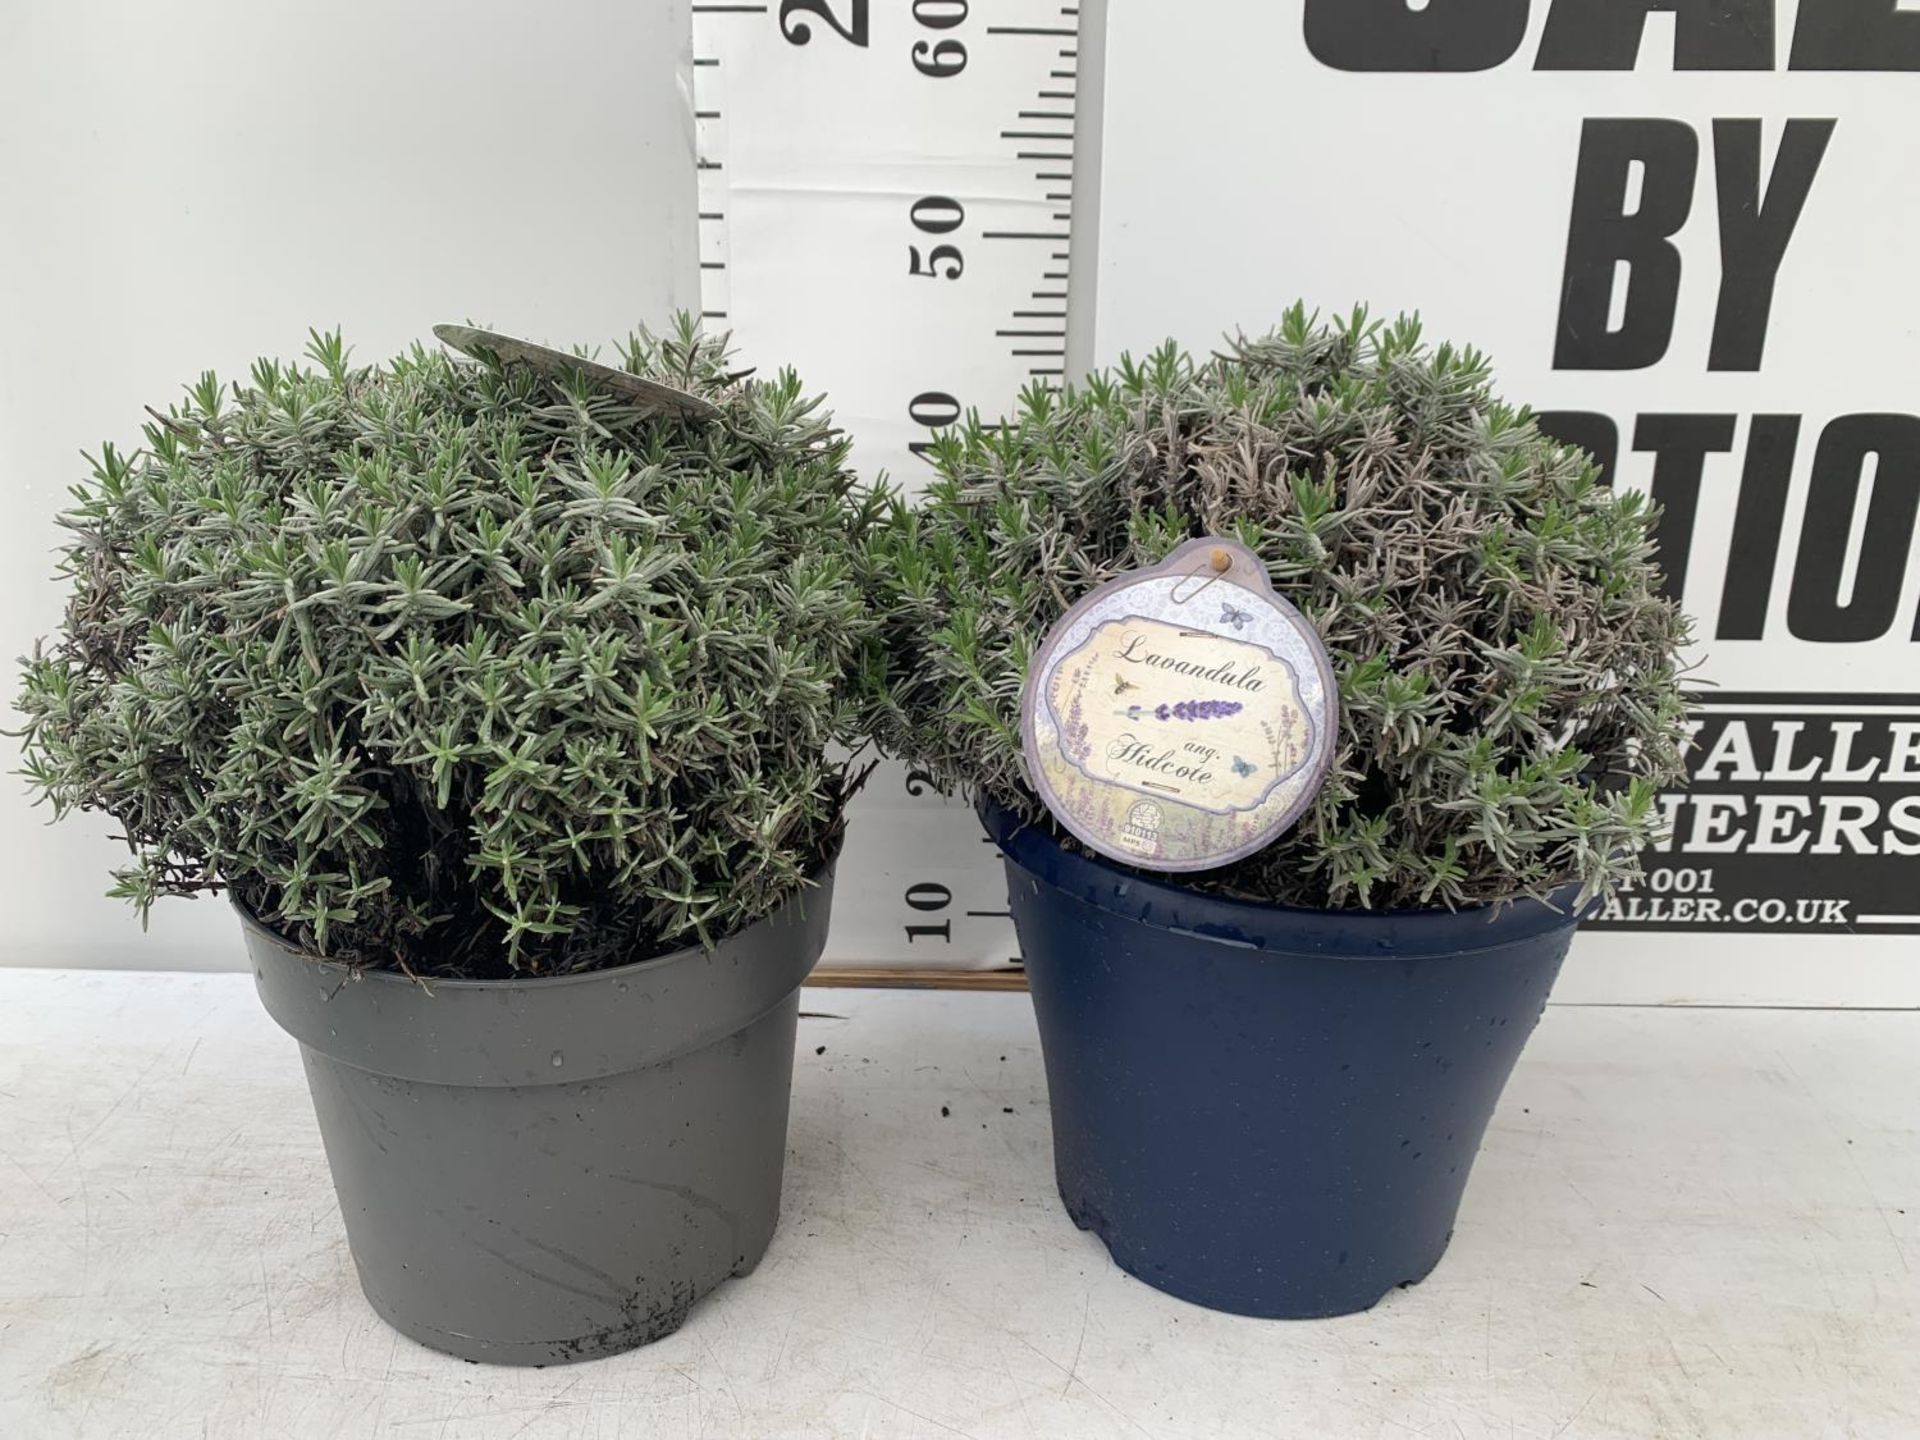 TWO LAVENDER 'HIDCOTE' IN 5 LTR POTS APPROX 40CM IN HEIGHT IN 5 LTR POTS TO BE SOLD FOR THE TWO - Image 2 of 8